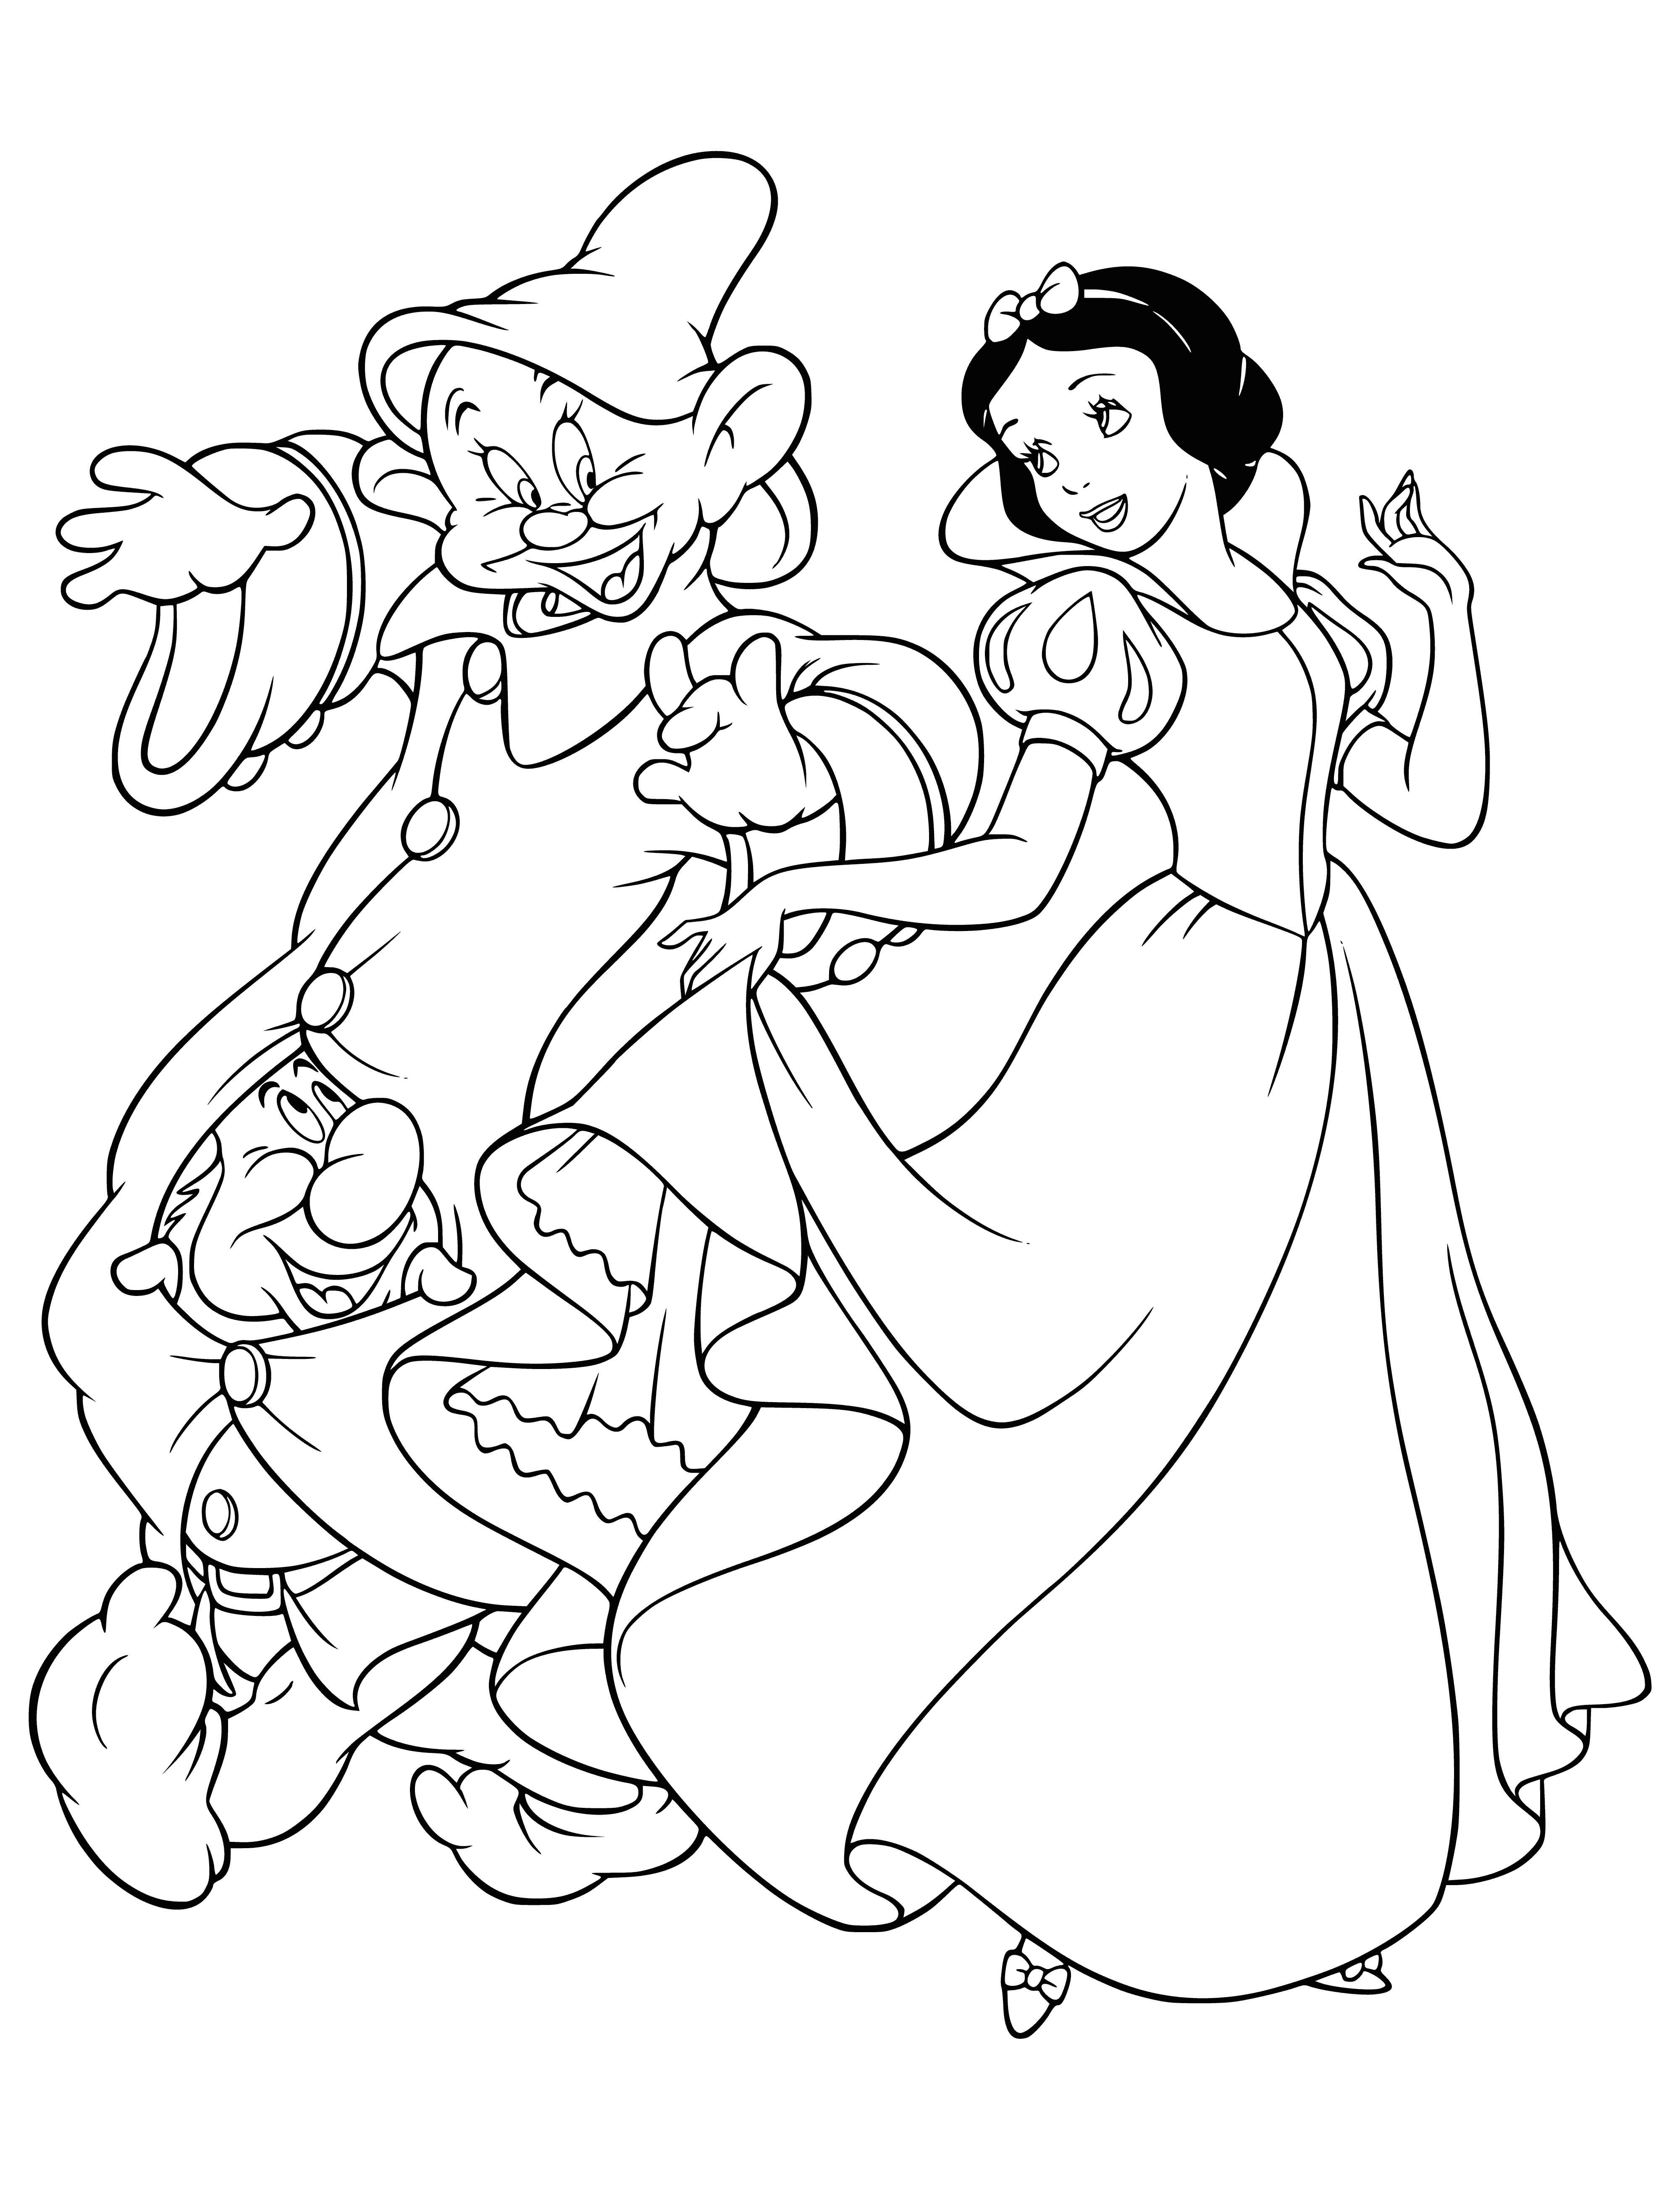 Snow White and the Dwarfs coloring page